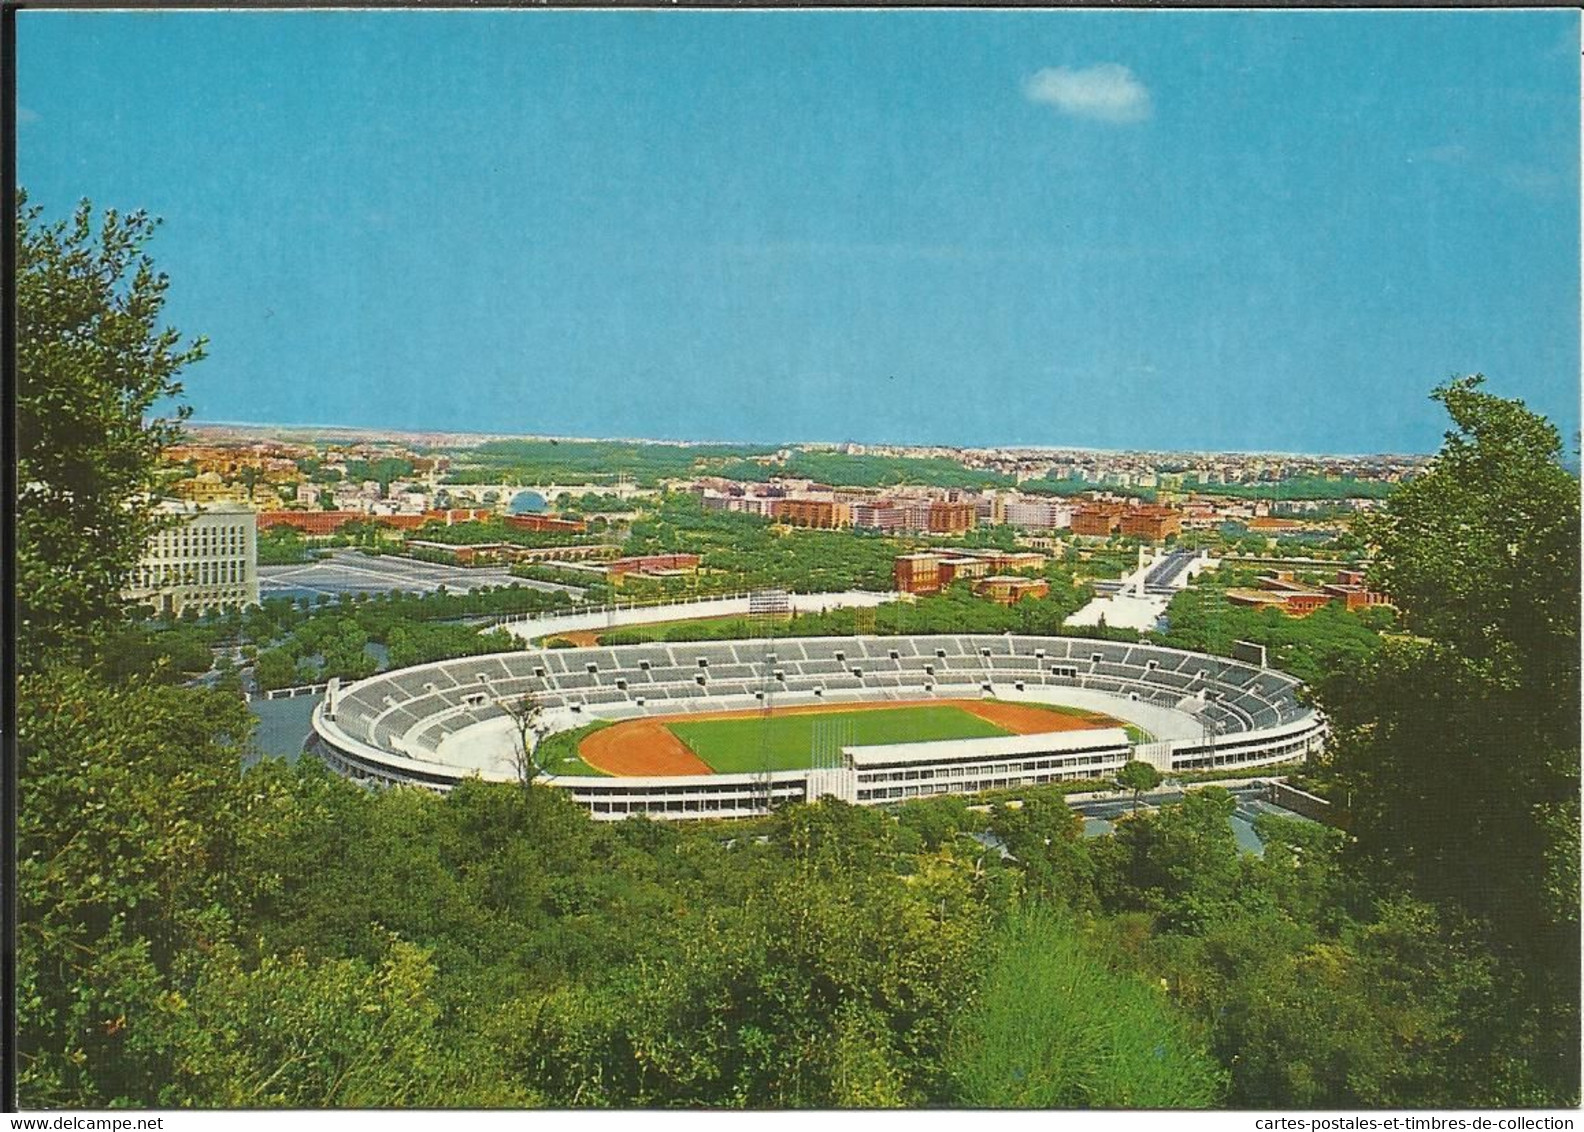 ROMA , Stadio Olimpico ; Stade Olympique ; Olympic Stadium ; Olympisches Stadion - Stades & Structures Sportives